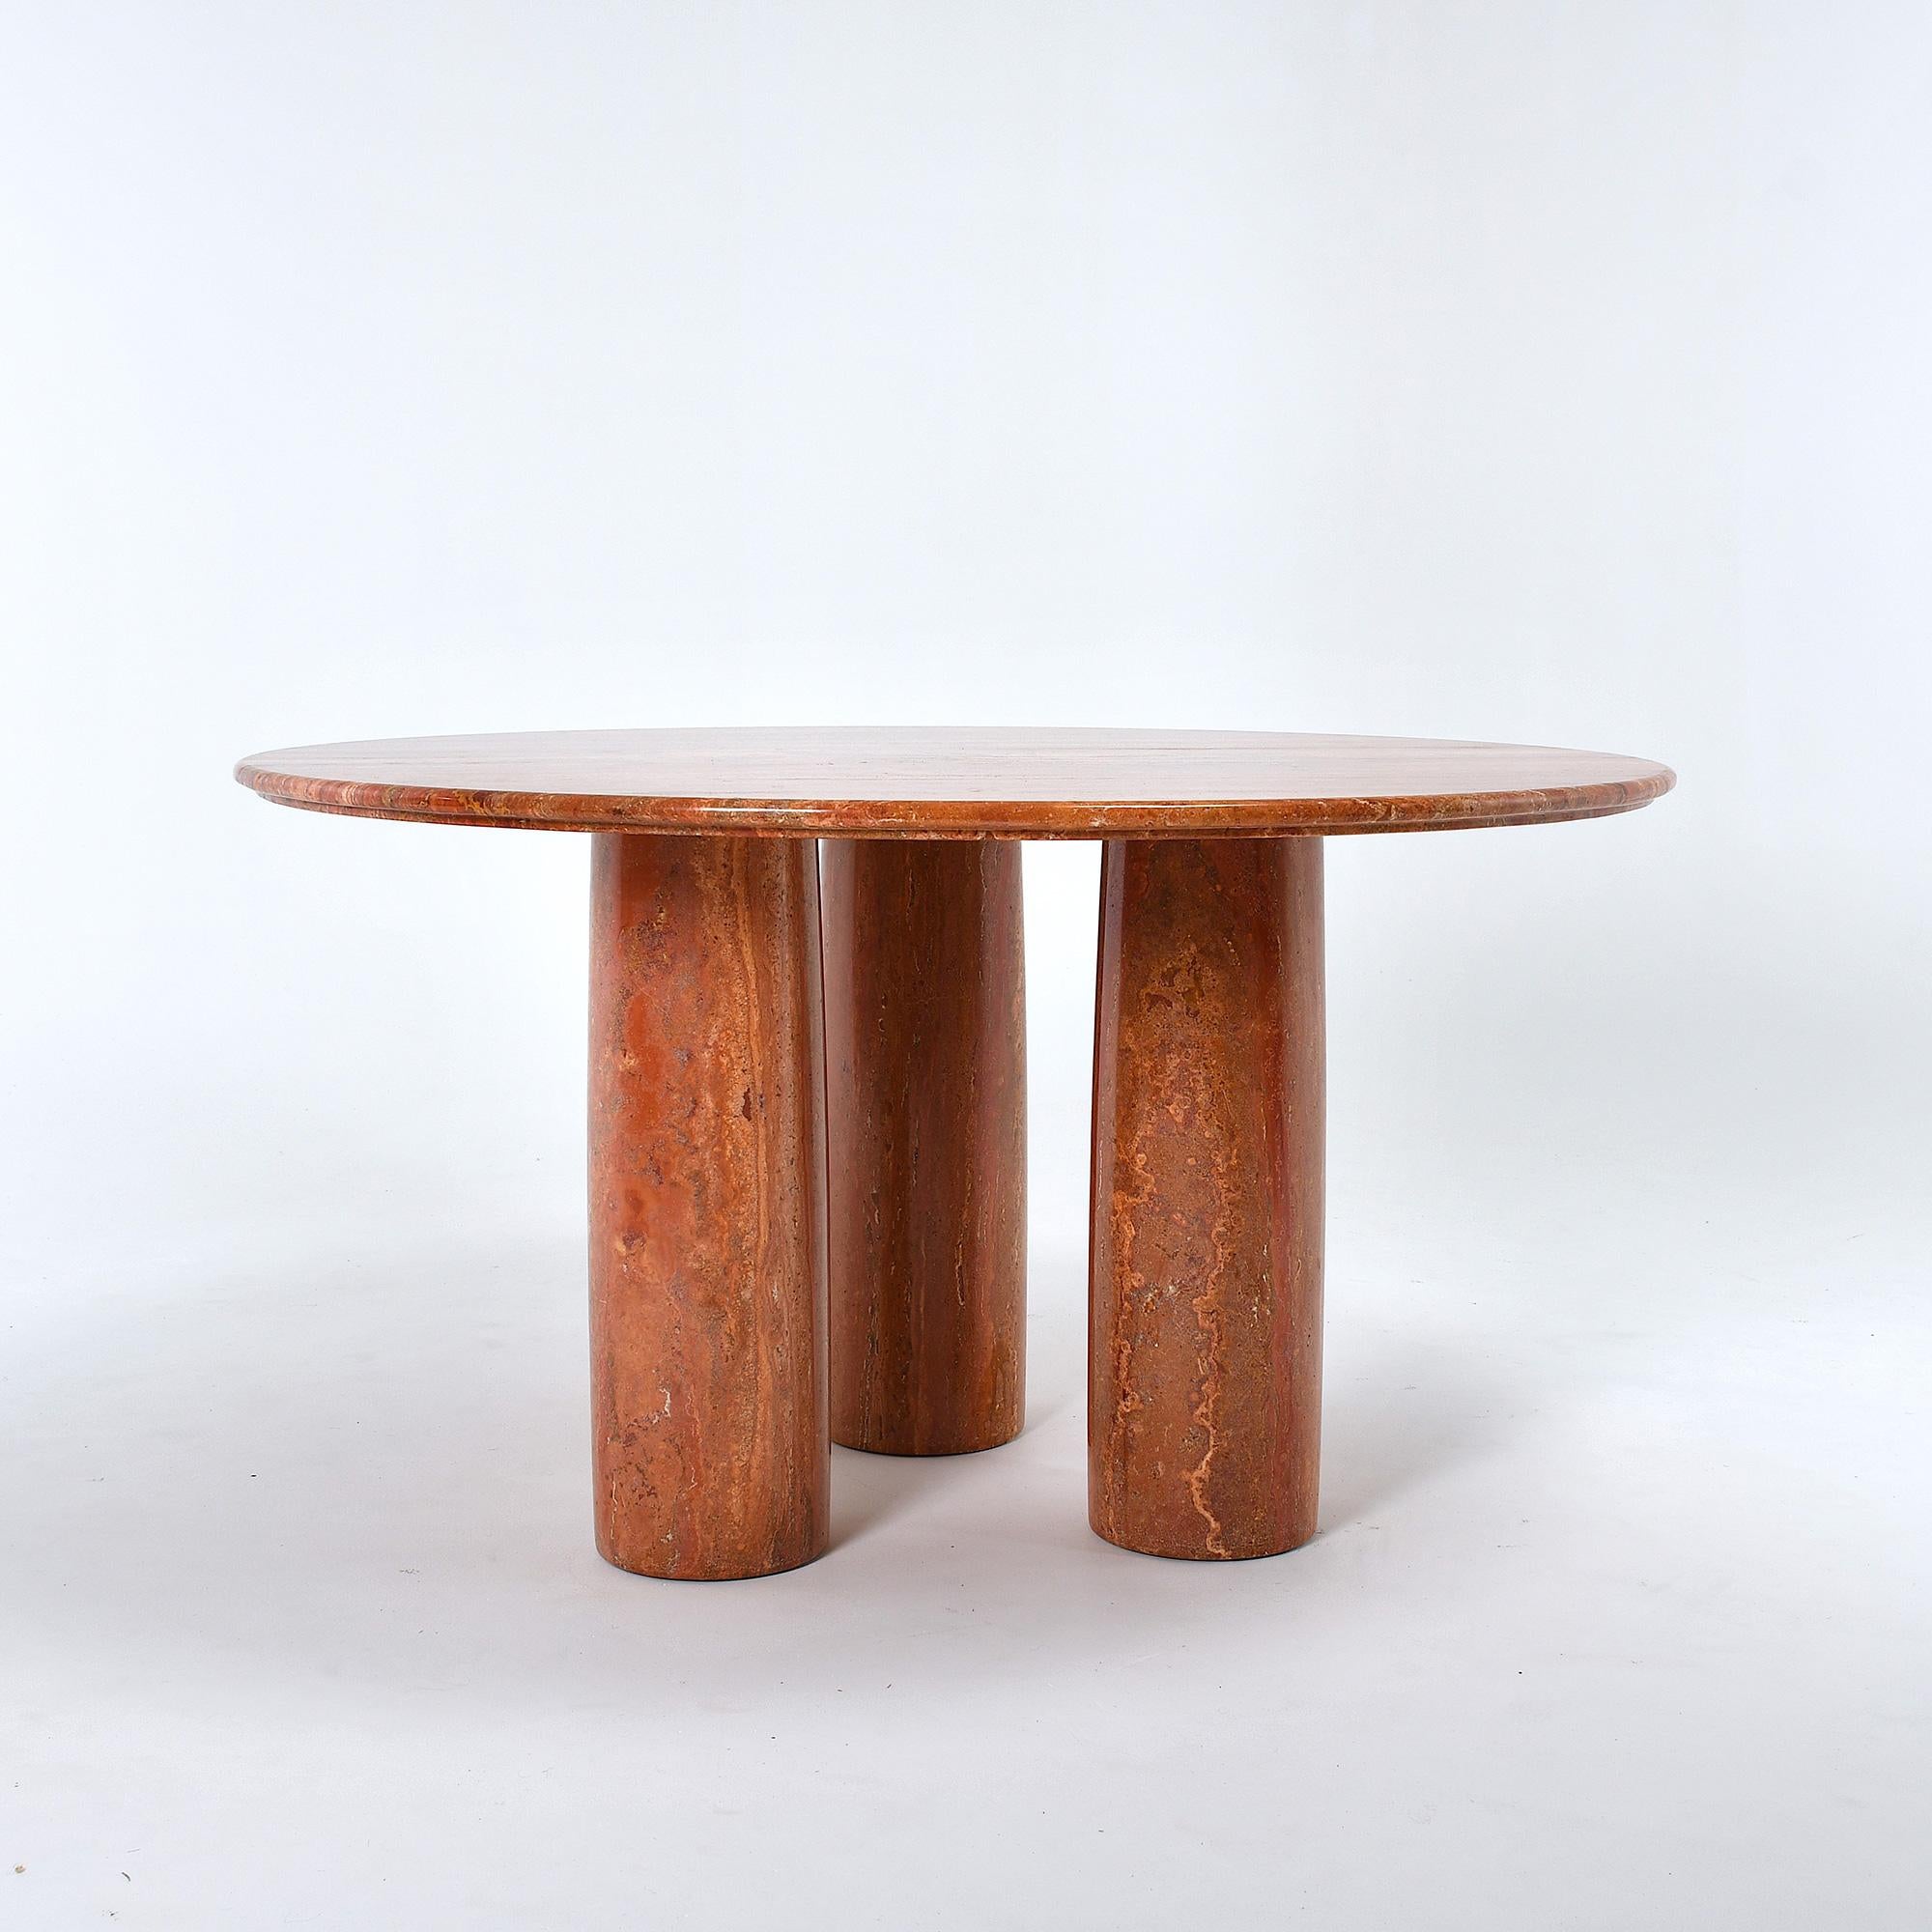 Large Mid-Century Modern round dining room table, designed by Mario Bellini and crafted by Cassina, Italy.
The project is 